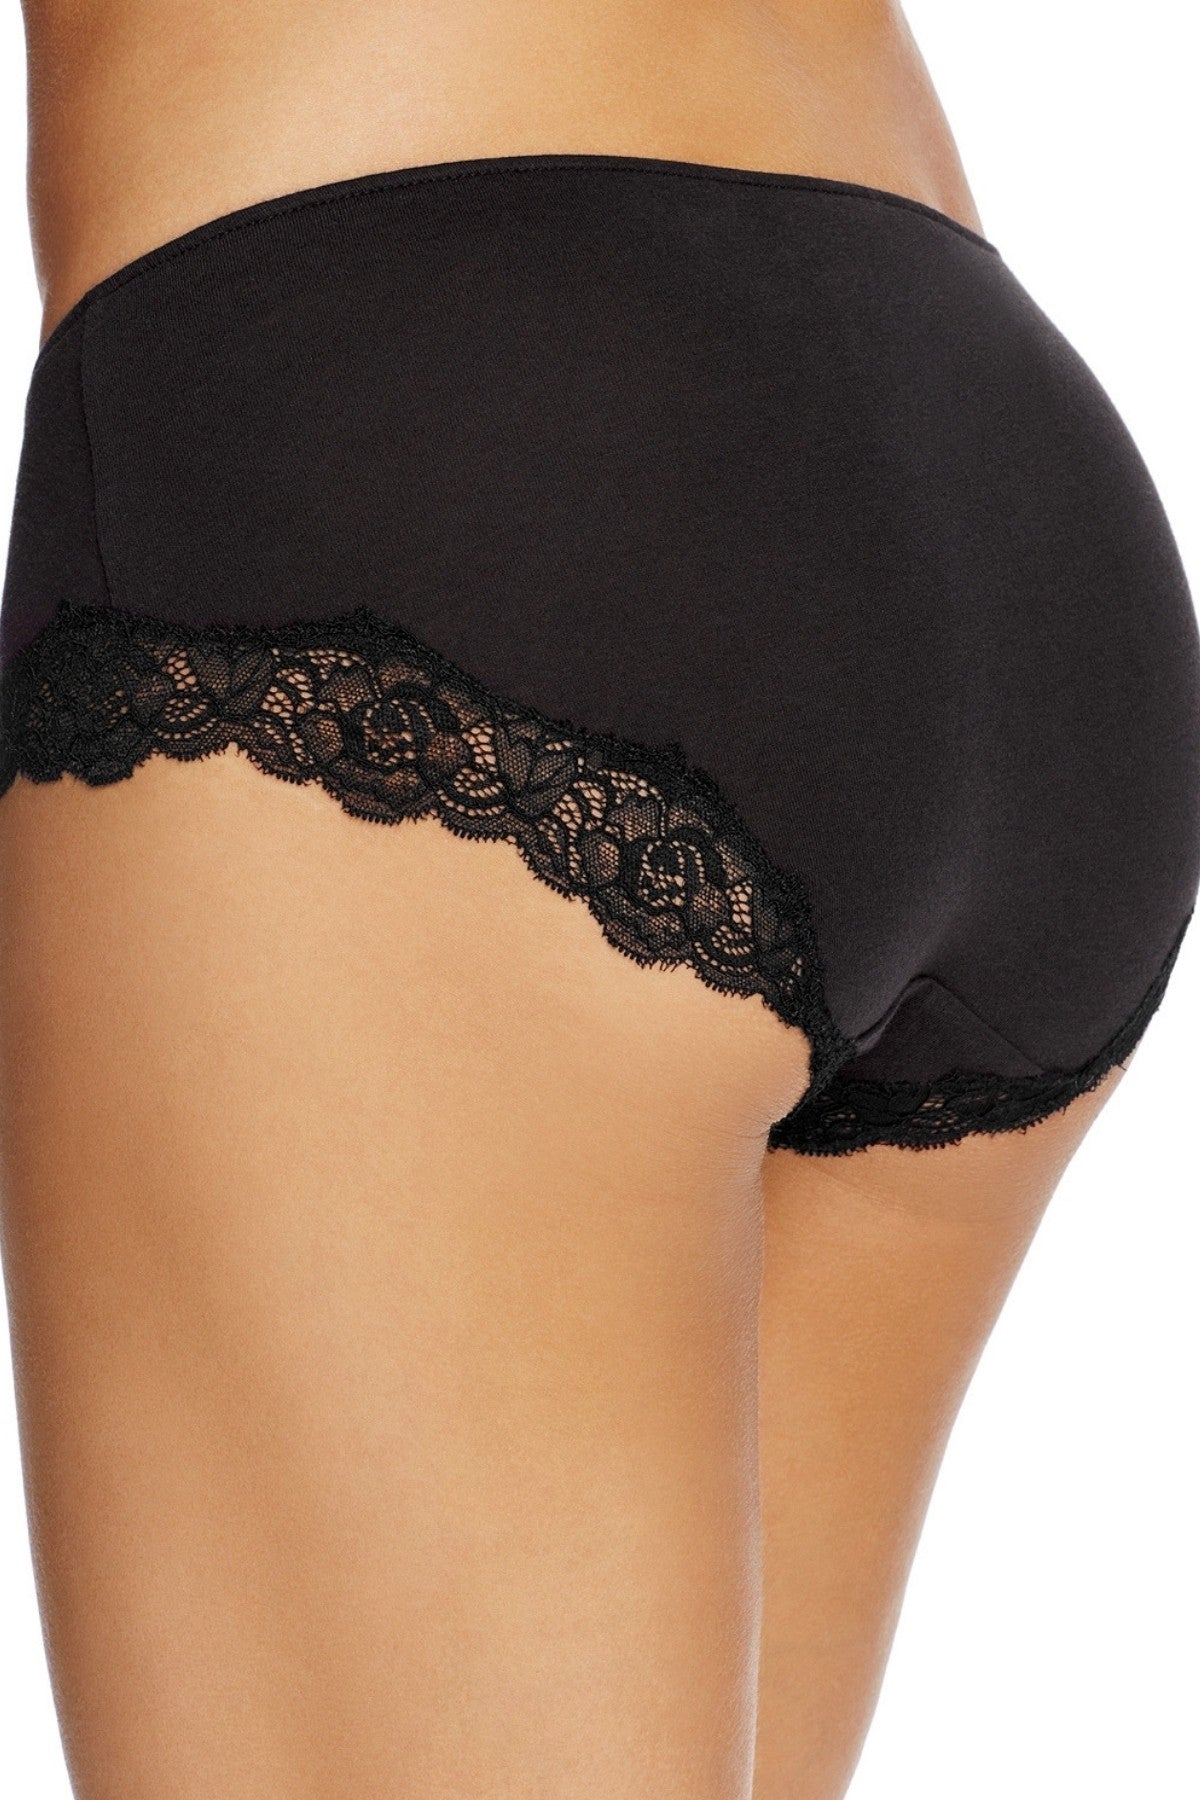 Only Hearts Black Organic Cotton Lace-Trim Hipster